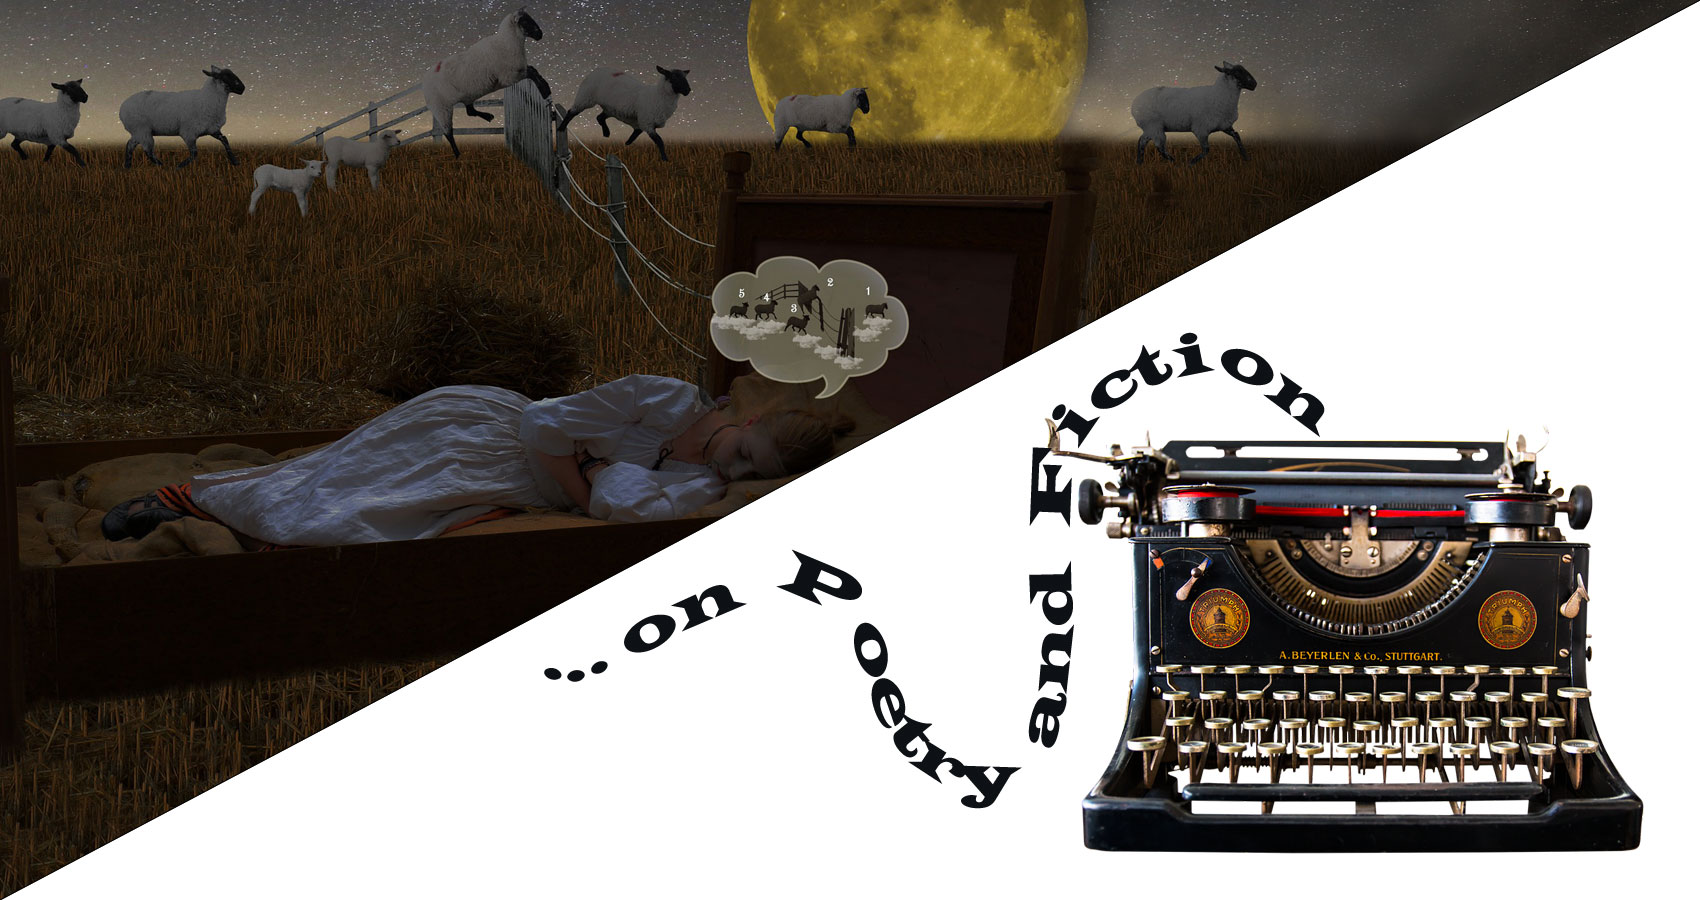 ...on Poetry and Fiction - THE WALTZ OF GHOULS (Insomnia) written by Phyllis P. Colucci at Spillwords.com